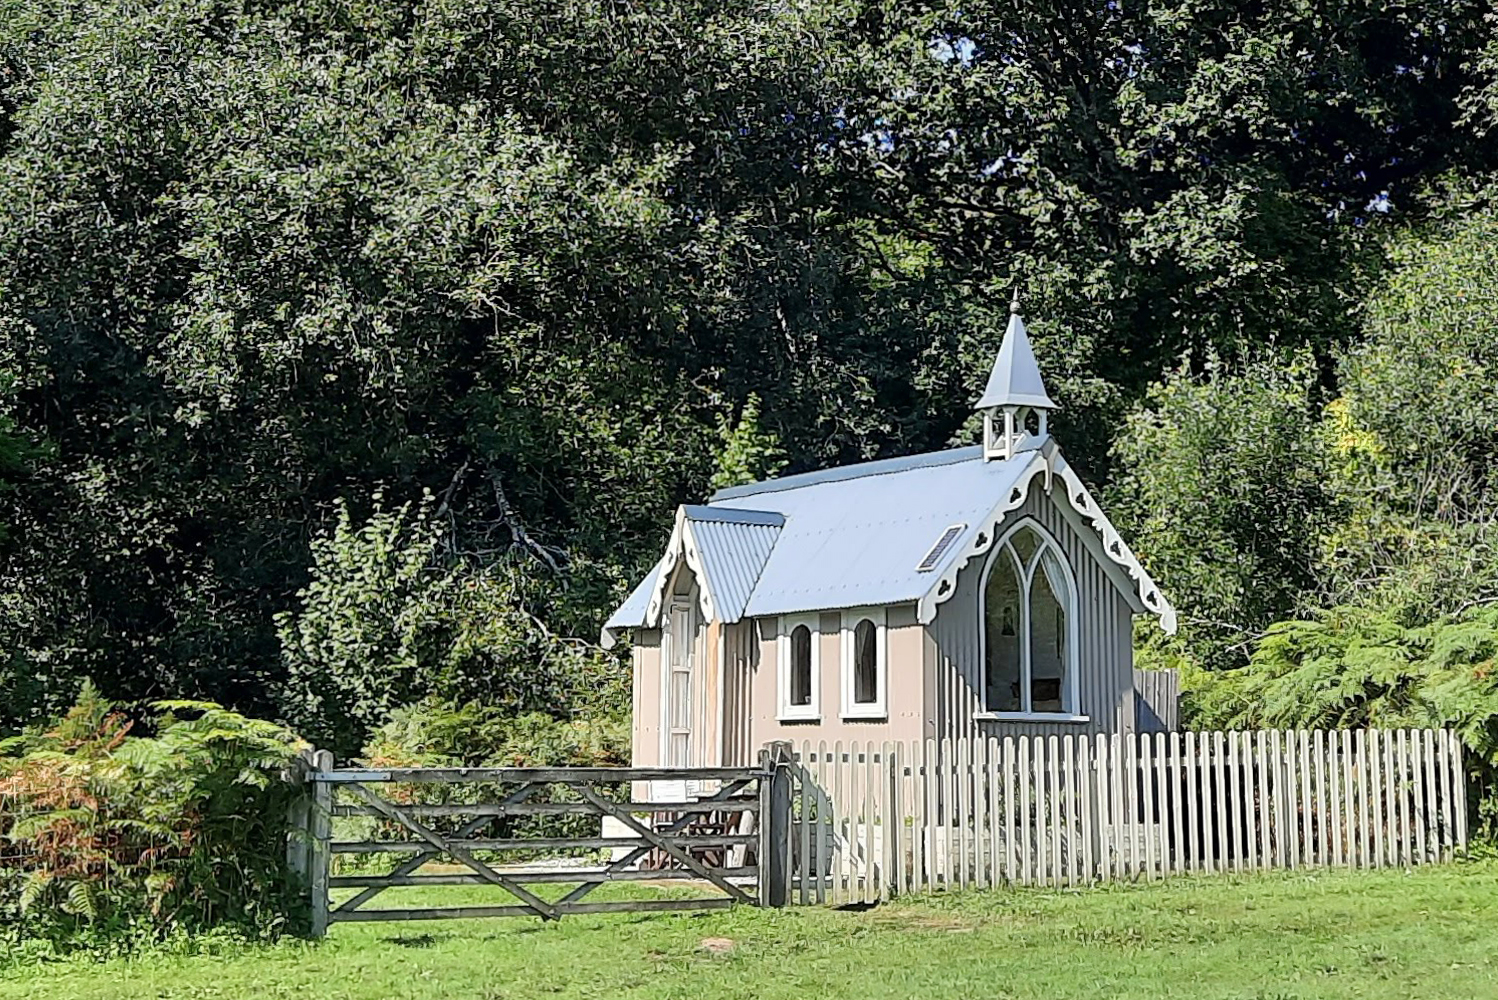 St Bride's shepherds hut with ensuite on a sunny summer day from the meadow showing the five bar gate and picket fence into the garden with ancient woodland behind it